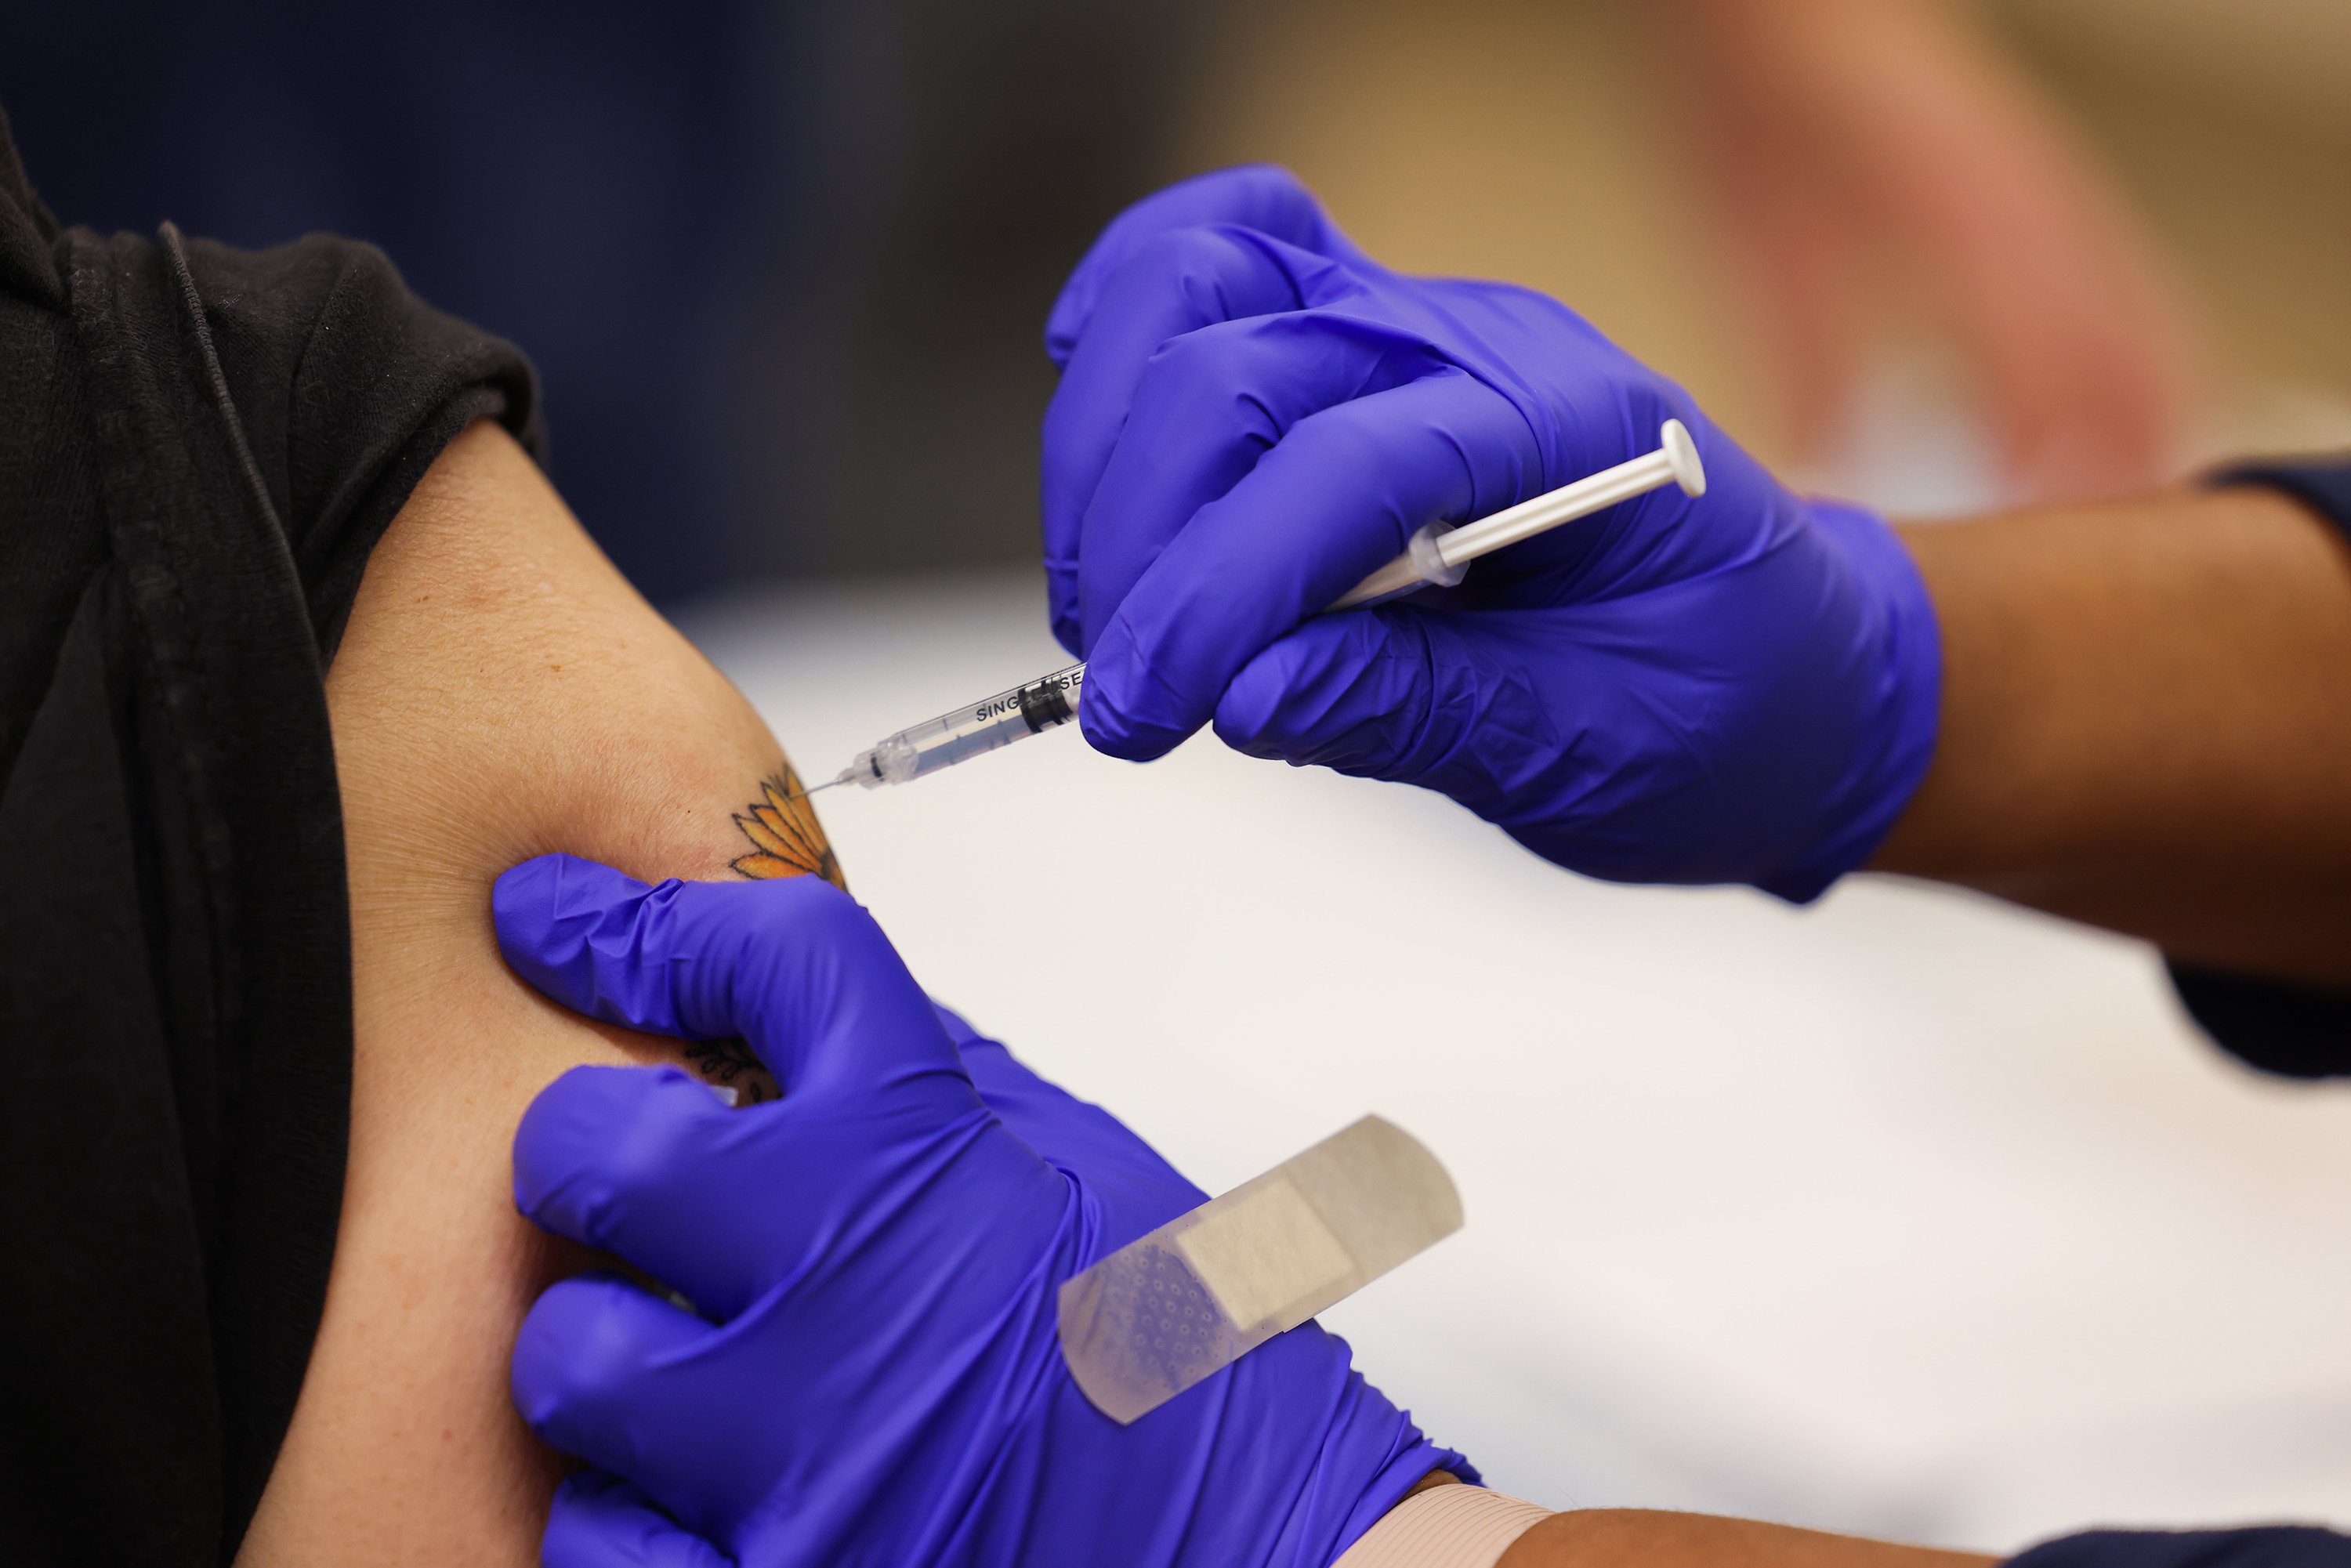 A Pfizer COVID-19 vaccine booster shot being administered in person's arm in Freeport, New York on November 30, 2021.